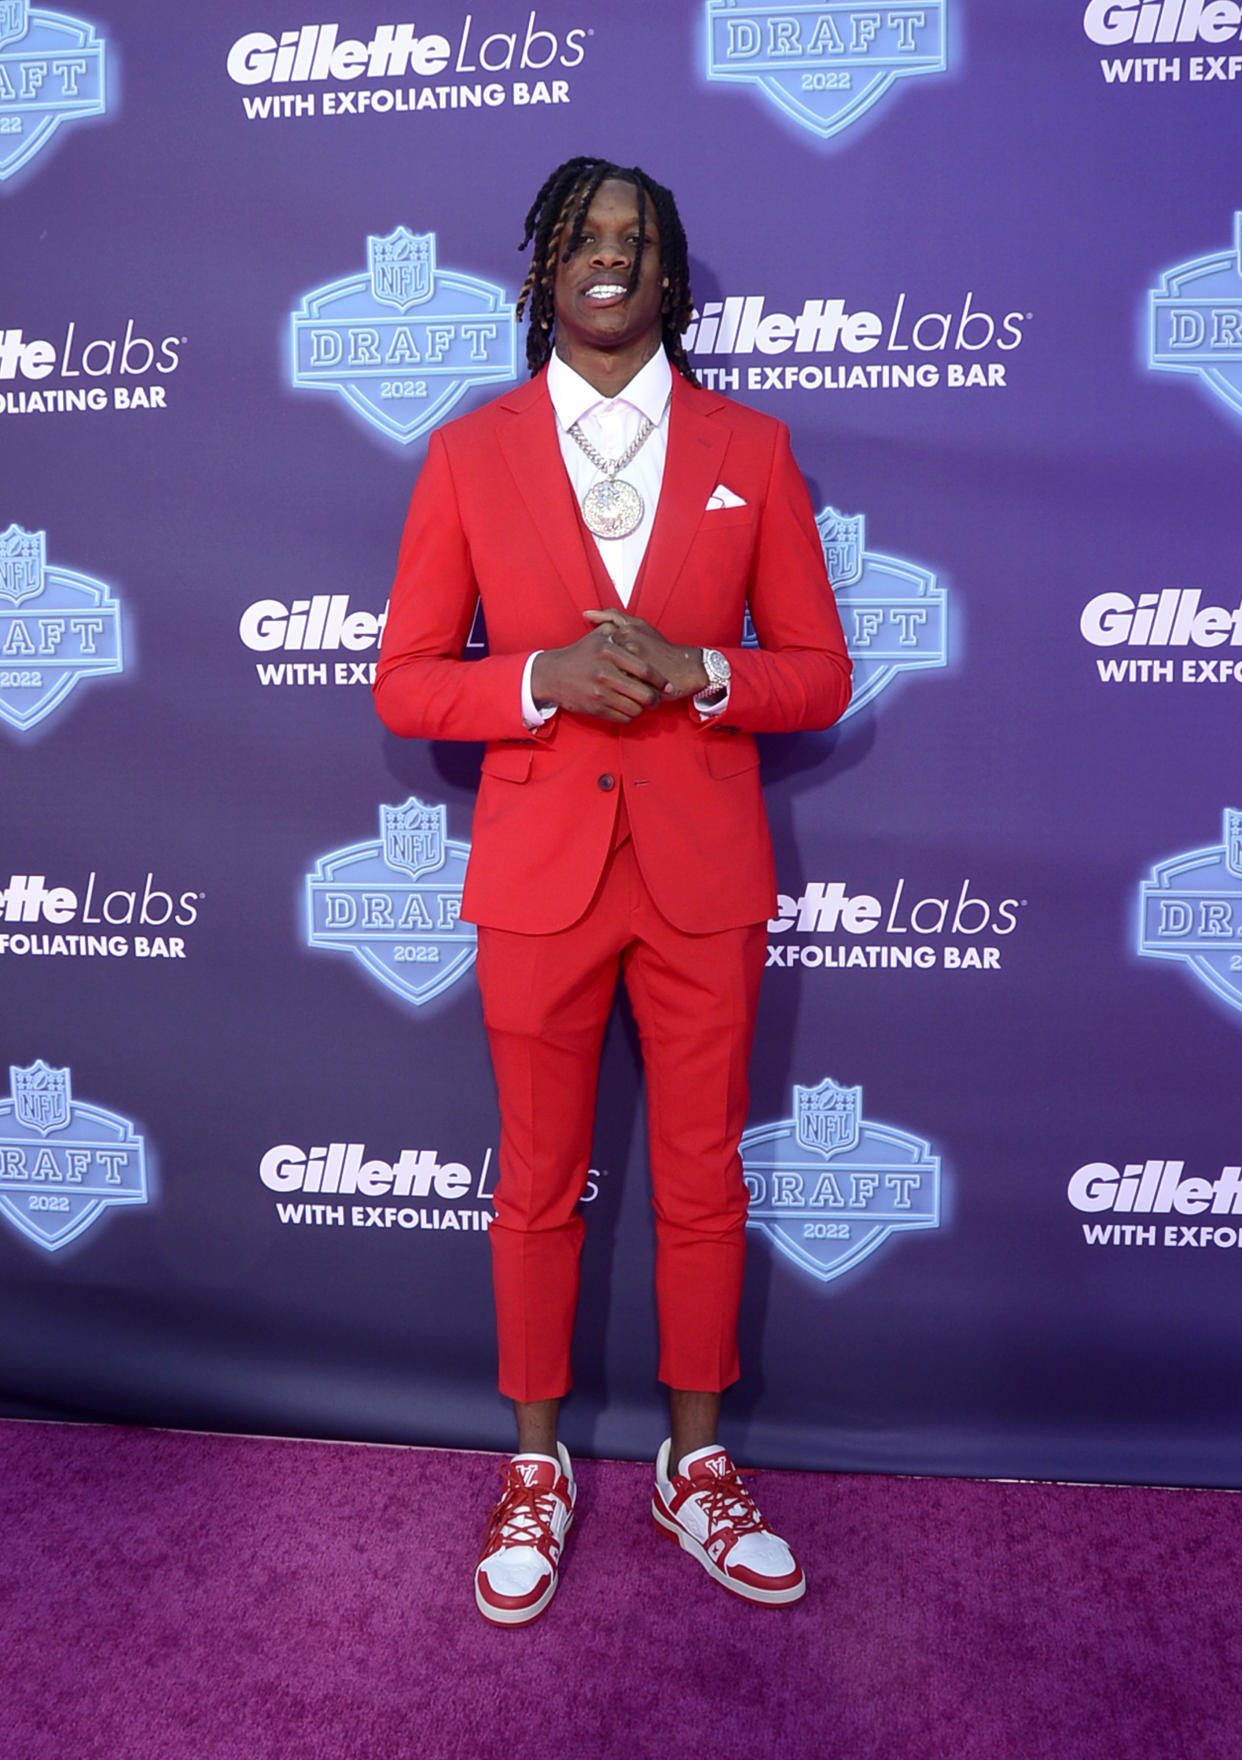 LAS VEGAS, NEVADA - APRIL 28: Jameson Williams attends the 2022 NFL Draft on April 28, 2022 in Las Vegas, Nevada. (Photo by Mindy Small/Getty Images)